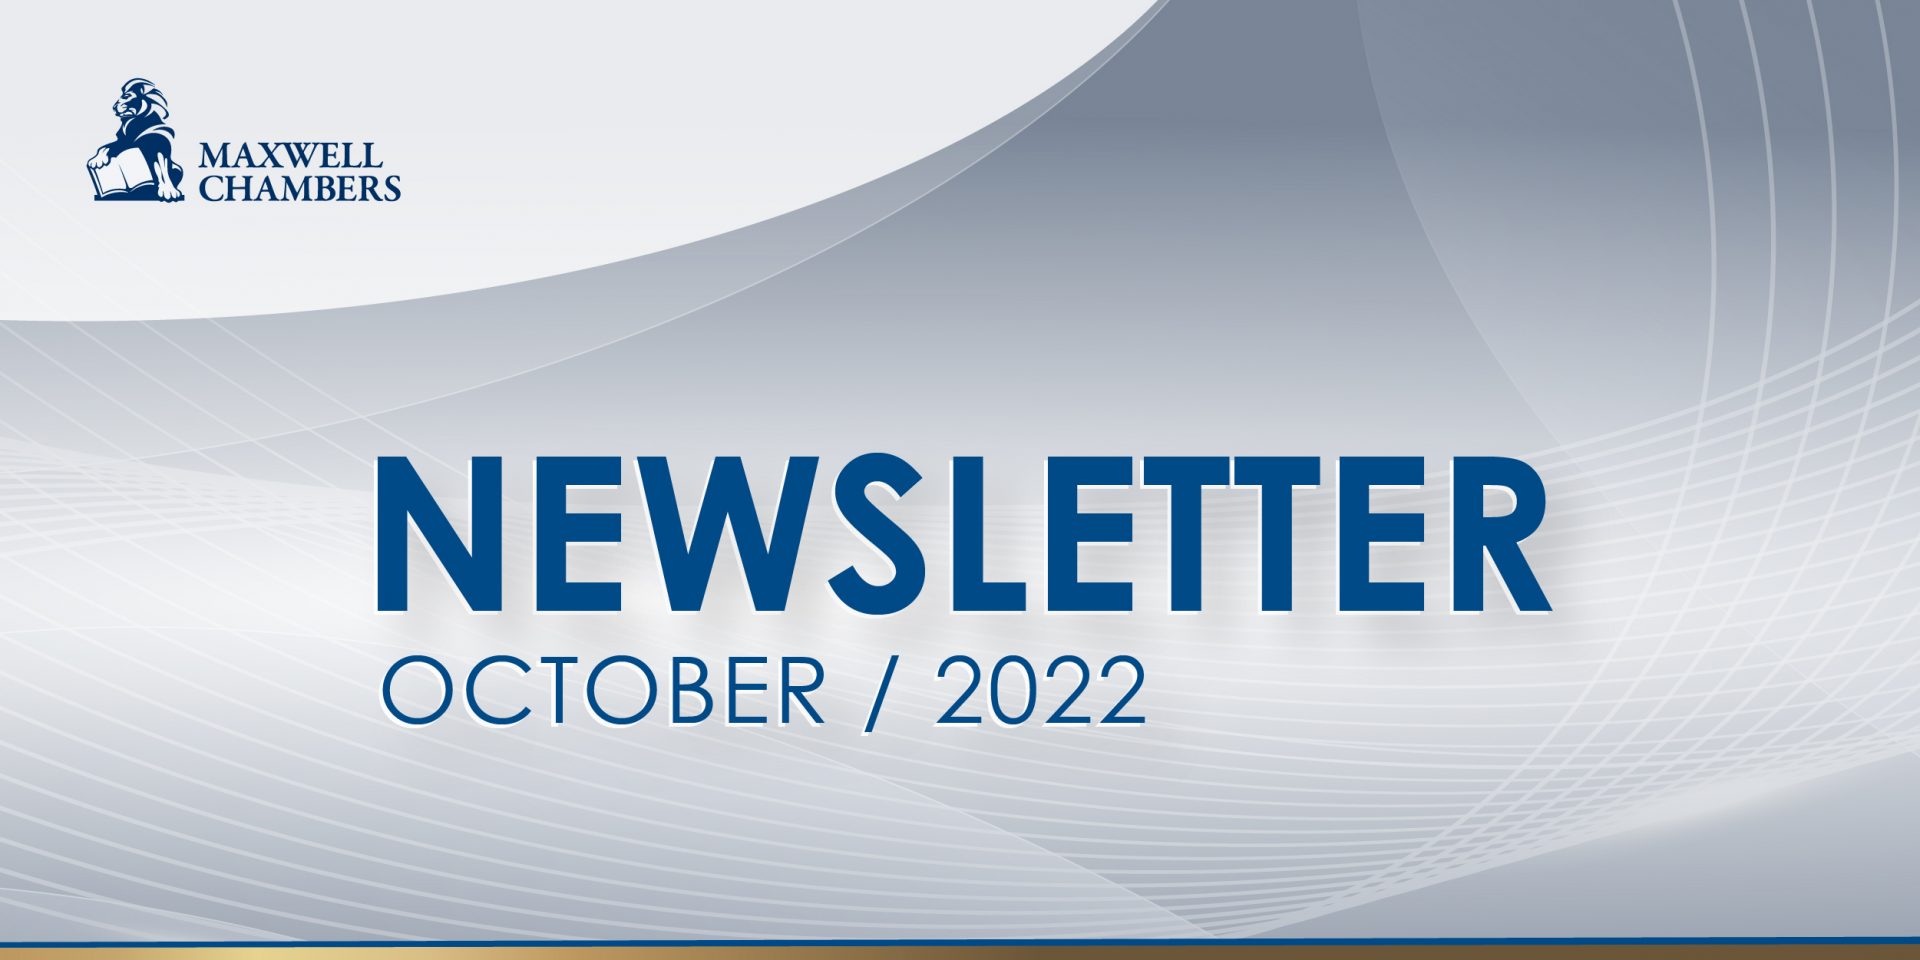 Maxwell Chambers Newsletter - October/2022